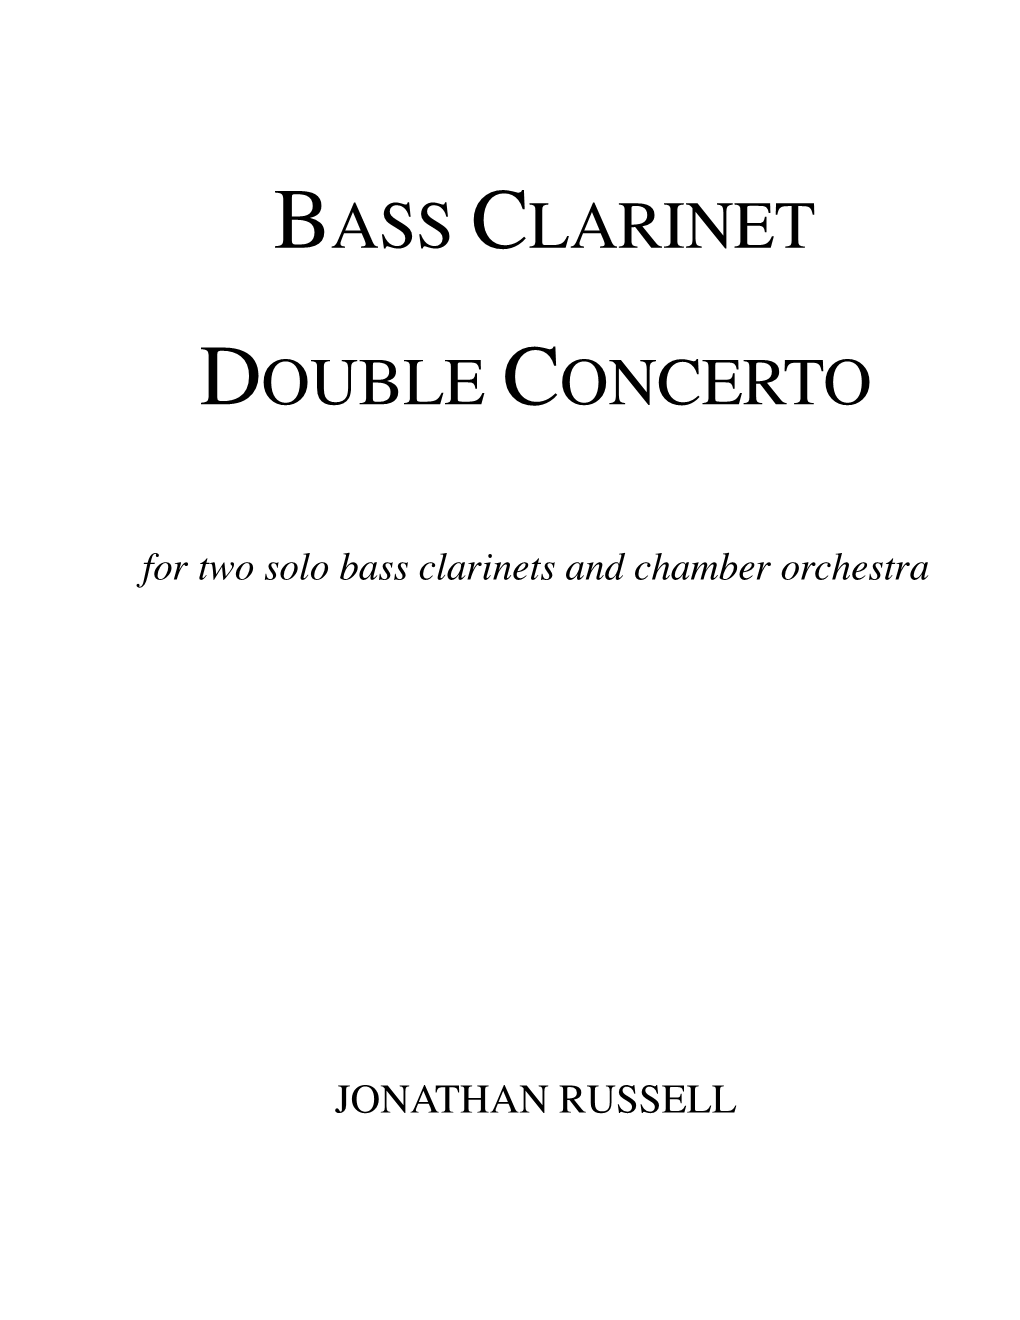 Bass Clarinet Double Concerto by Jonathan Russell